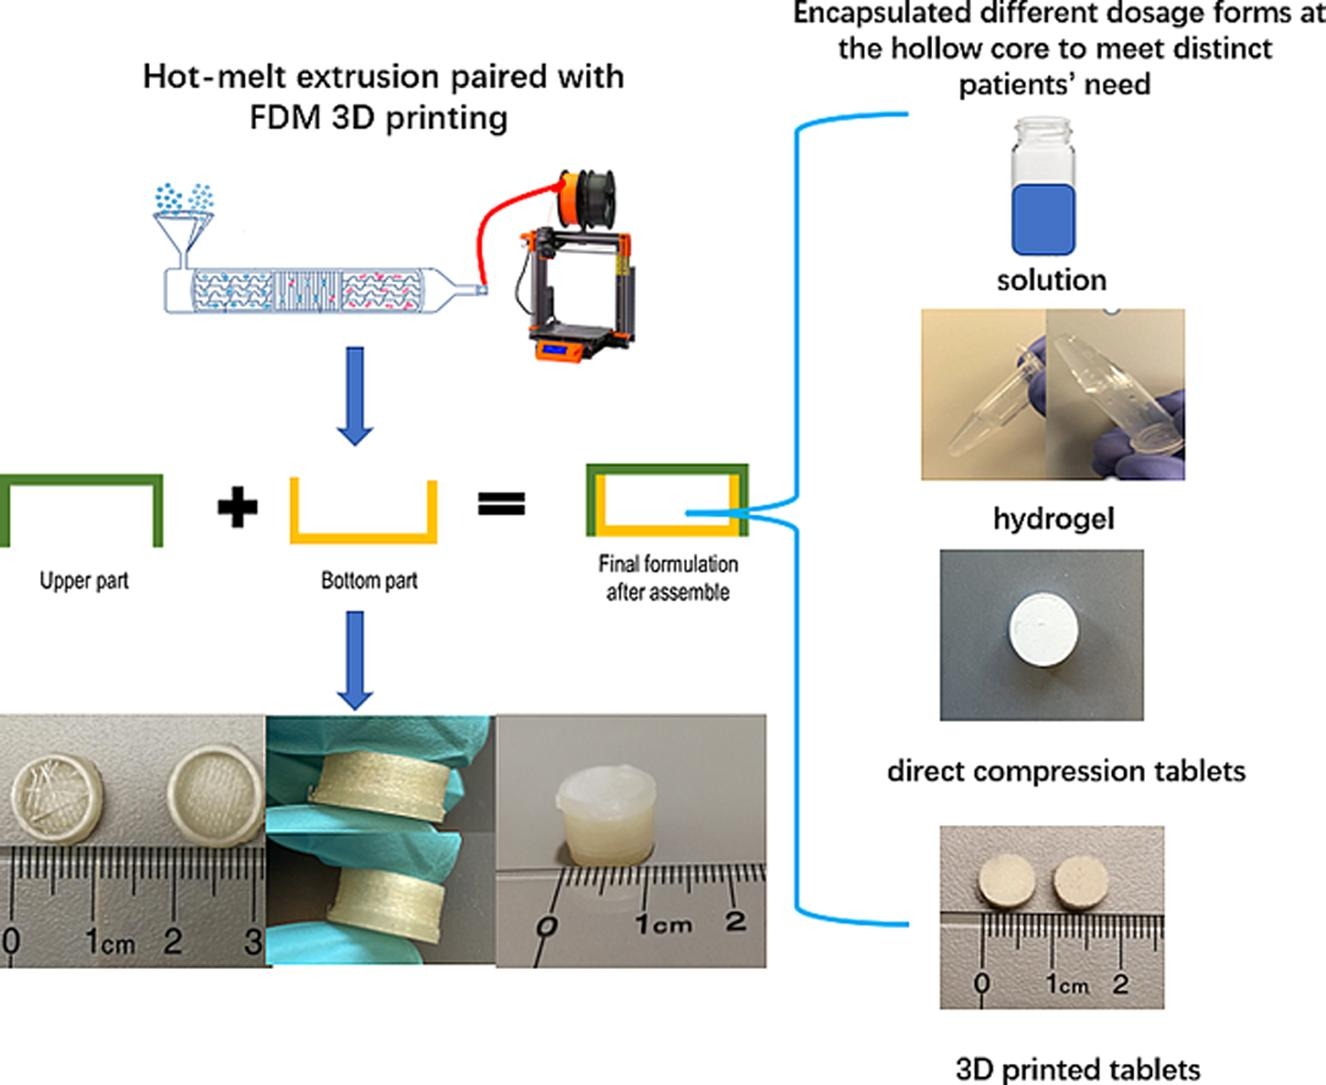 Development of multifunctional drug delivery system via hot-melt extrusion paired with fused deposition modeling 3D printing techniques